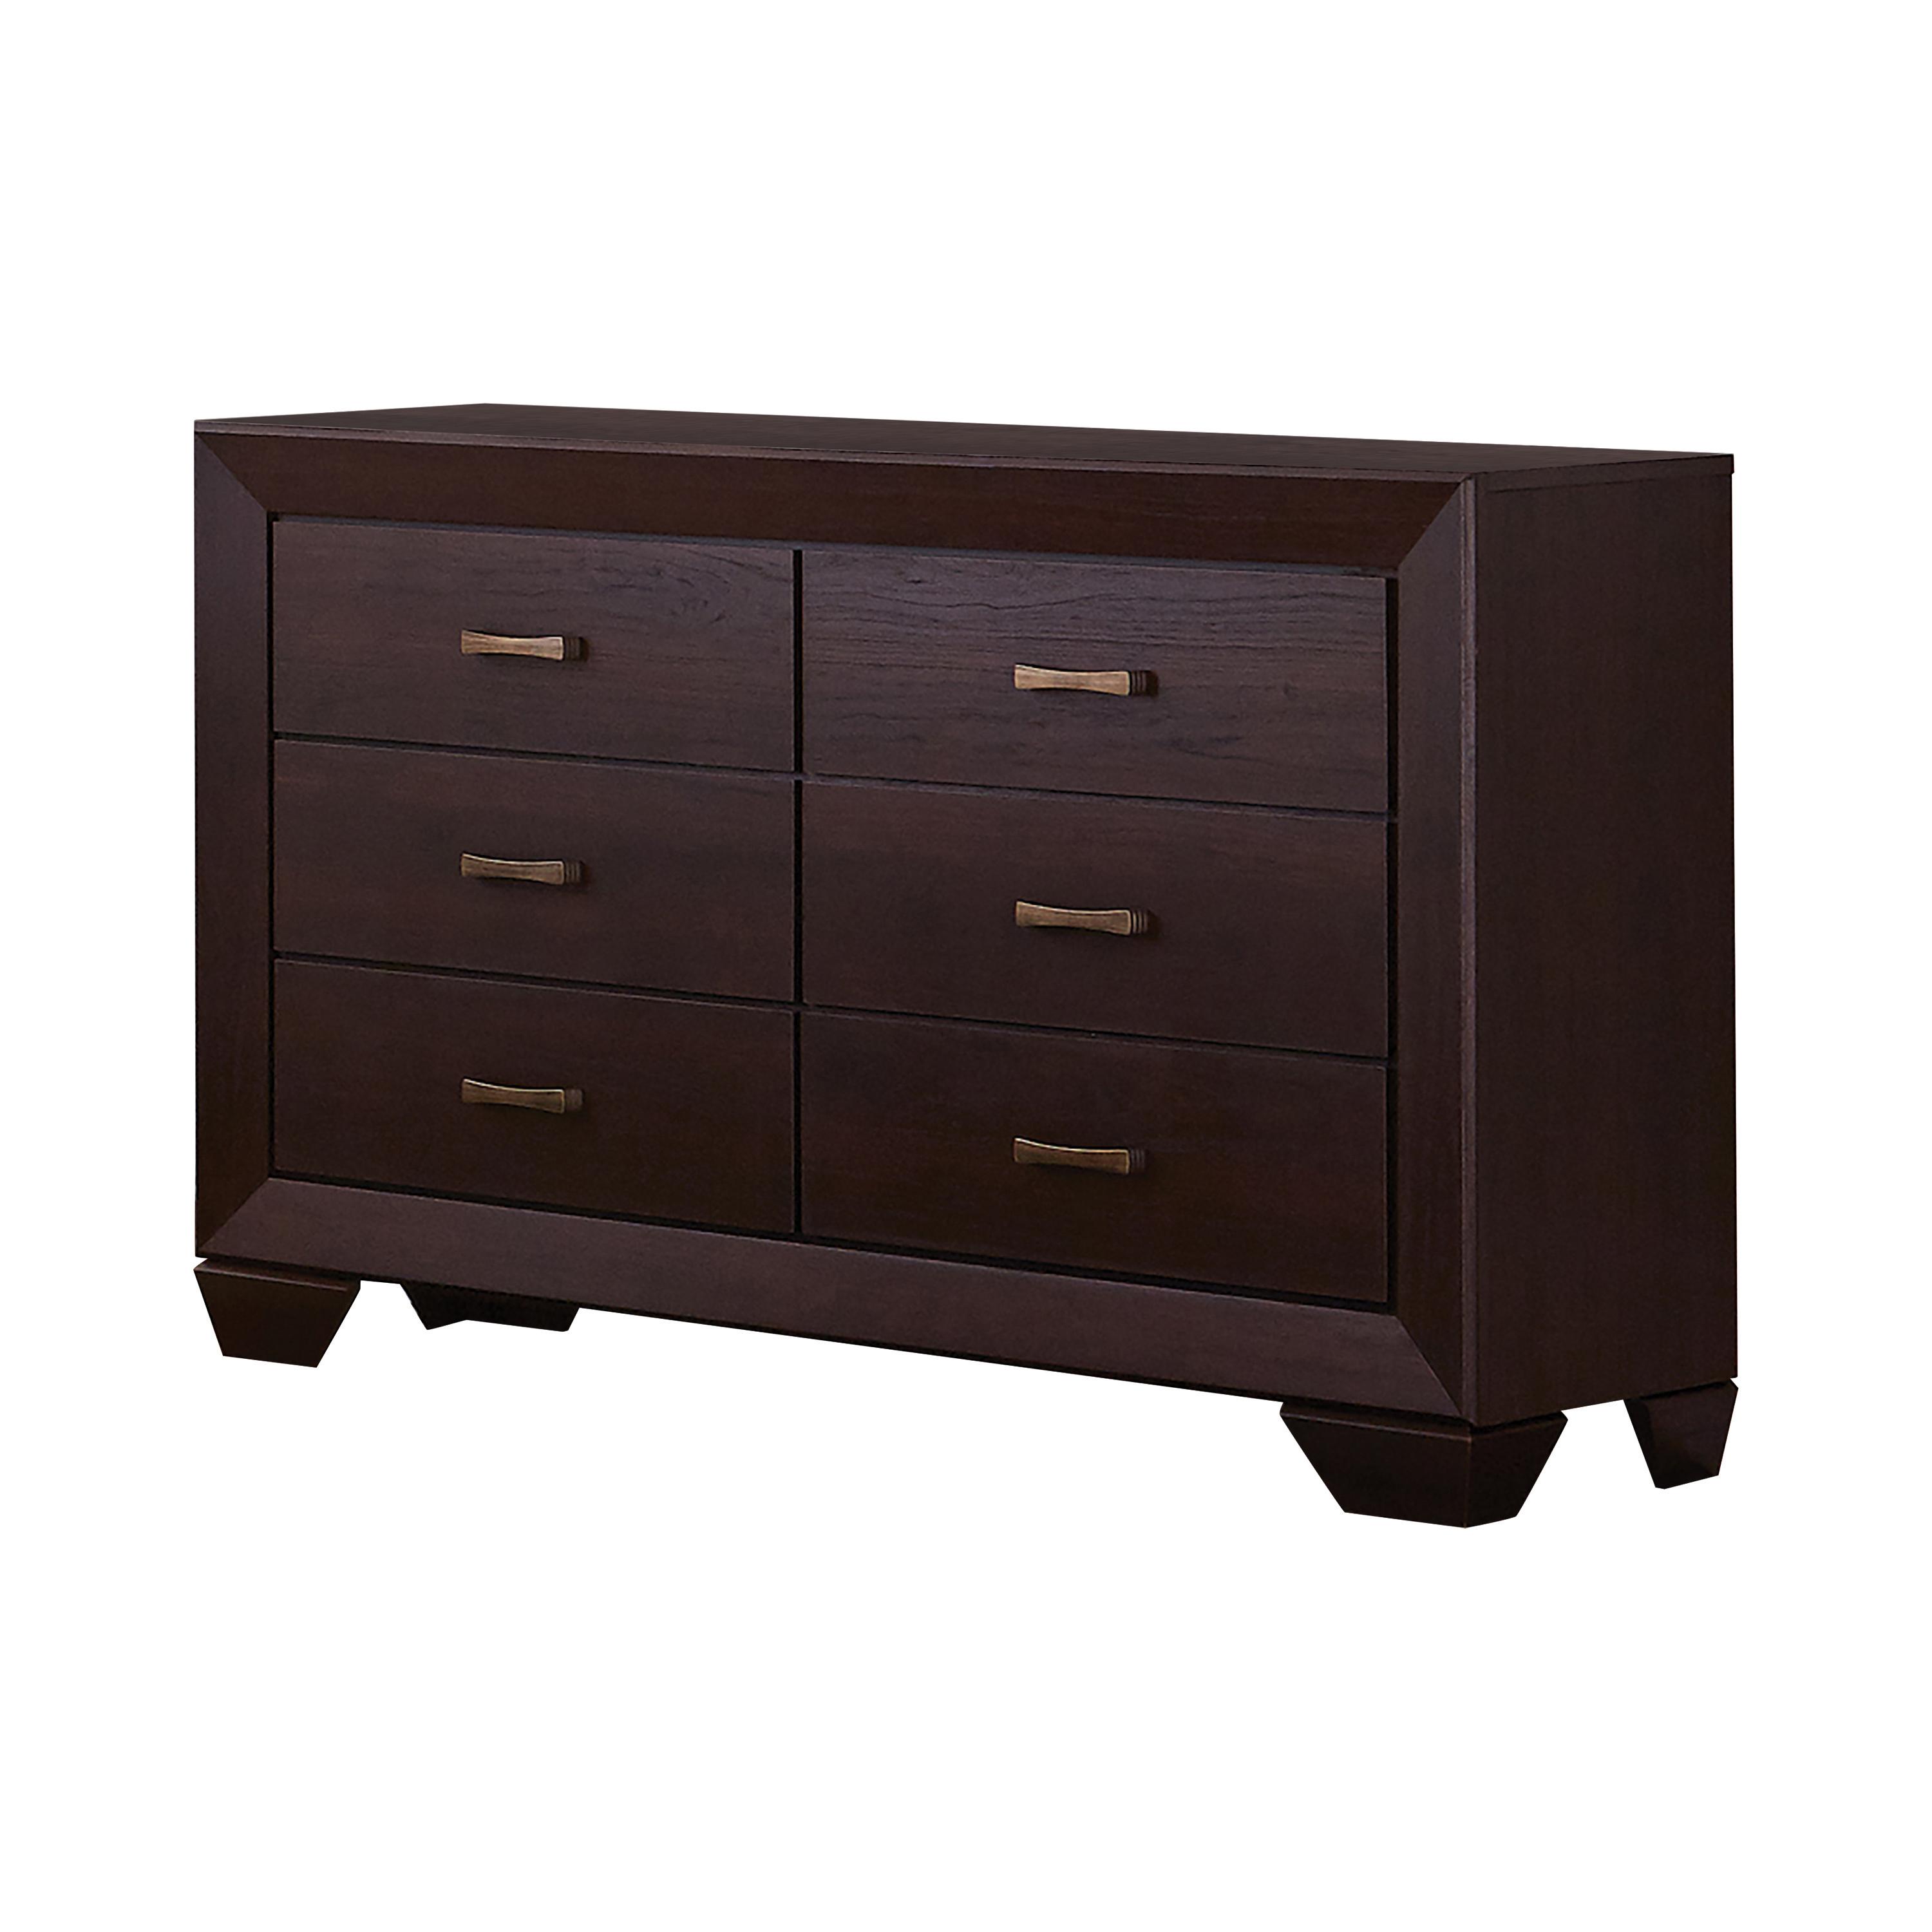 Transitional Dresser 204393 Kauffman 204393 in Cocoa 